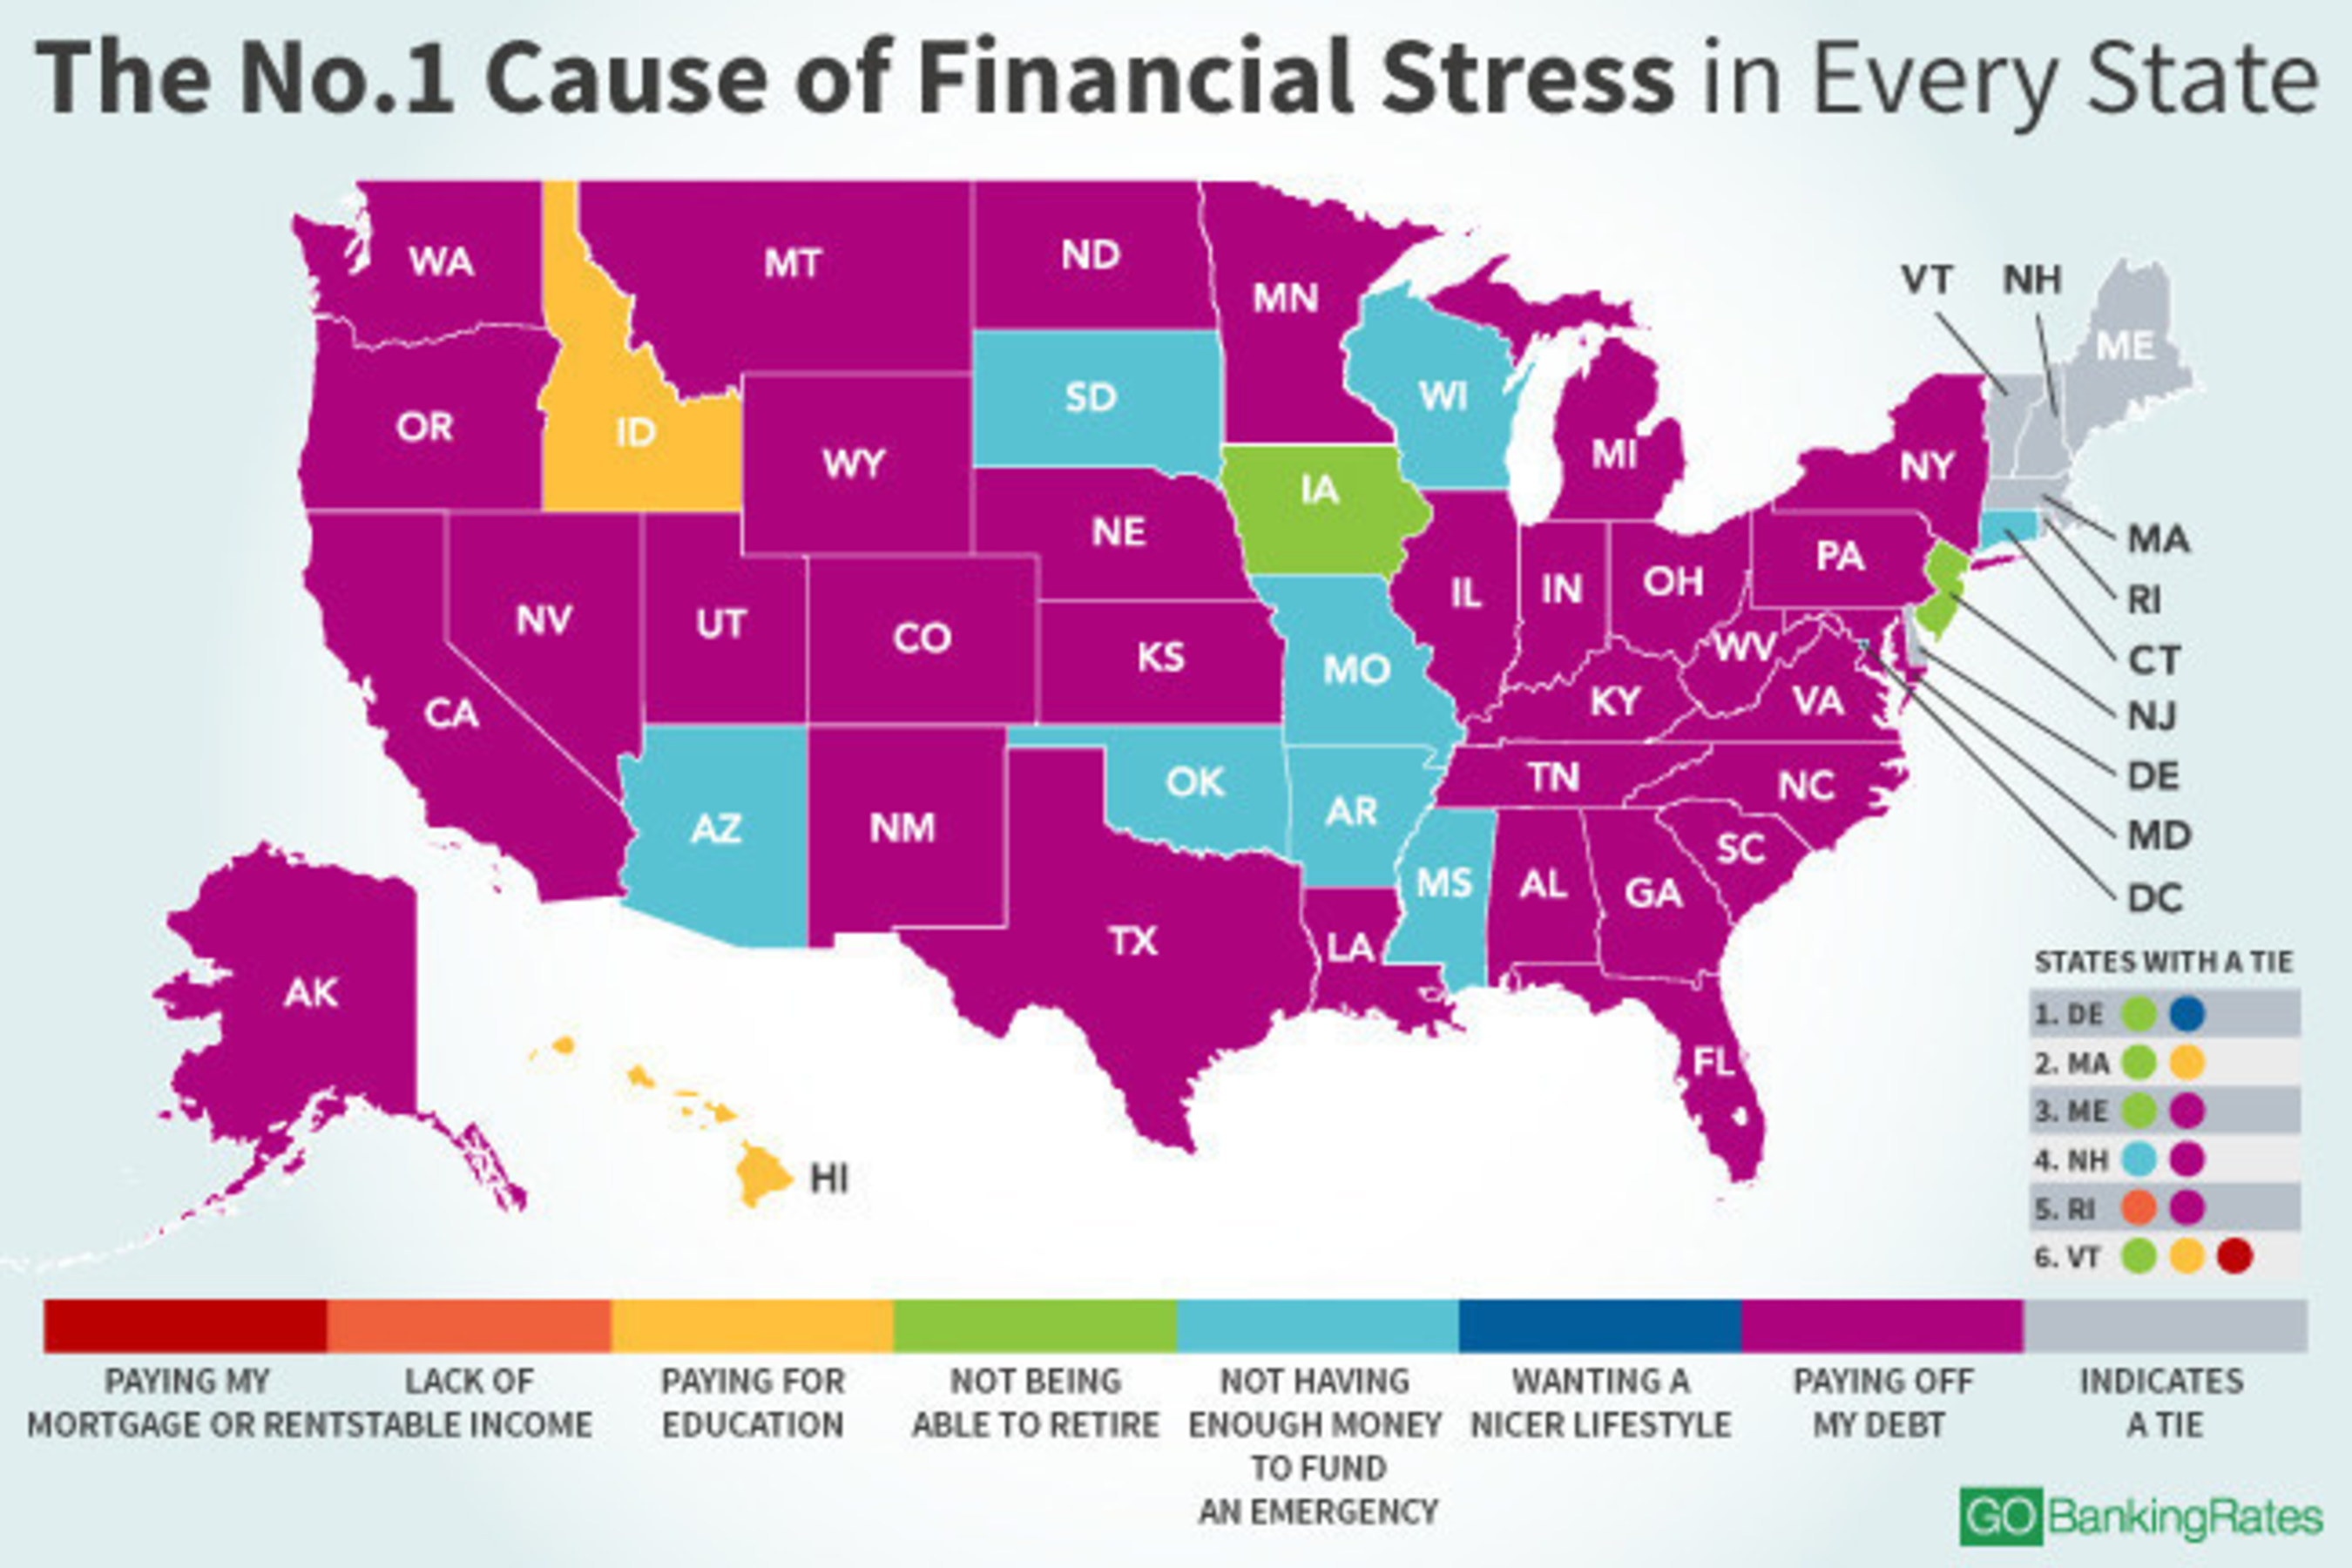 Latest GOBankingRates survey asked Americans, "Of the following, what is your No. 1 cause of financial stress?"